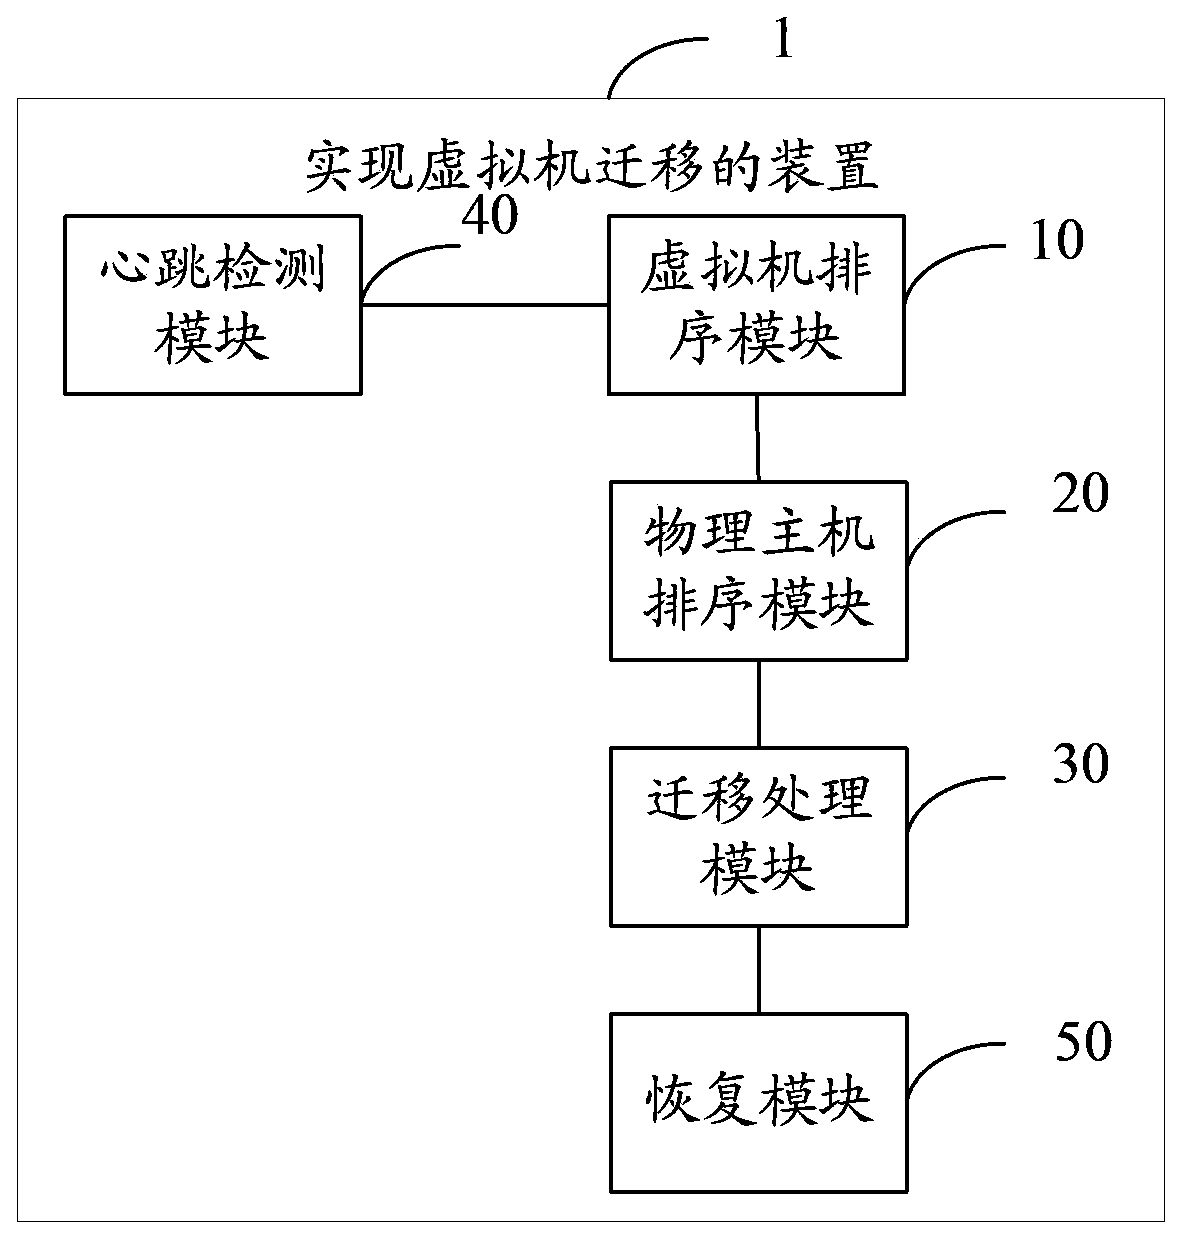 Method and device for realizing virtual machine migration and cluster system